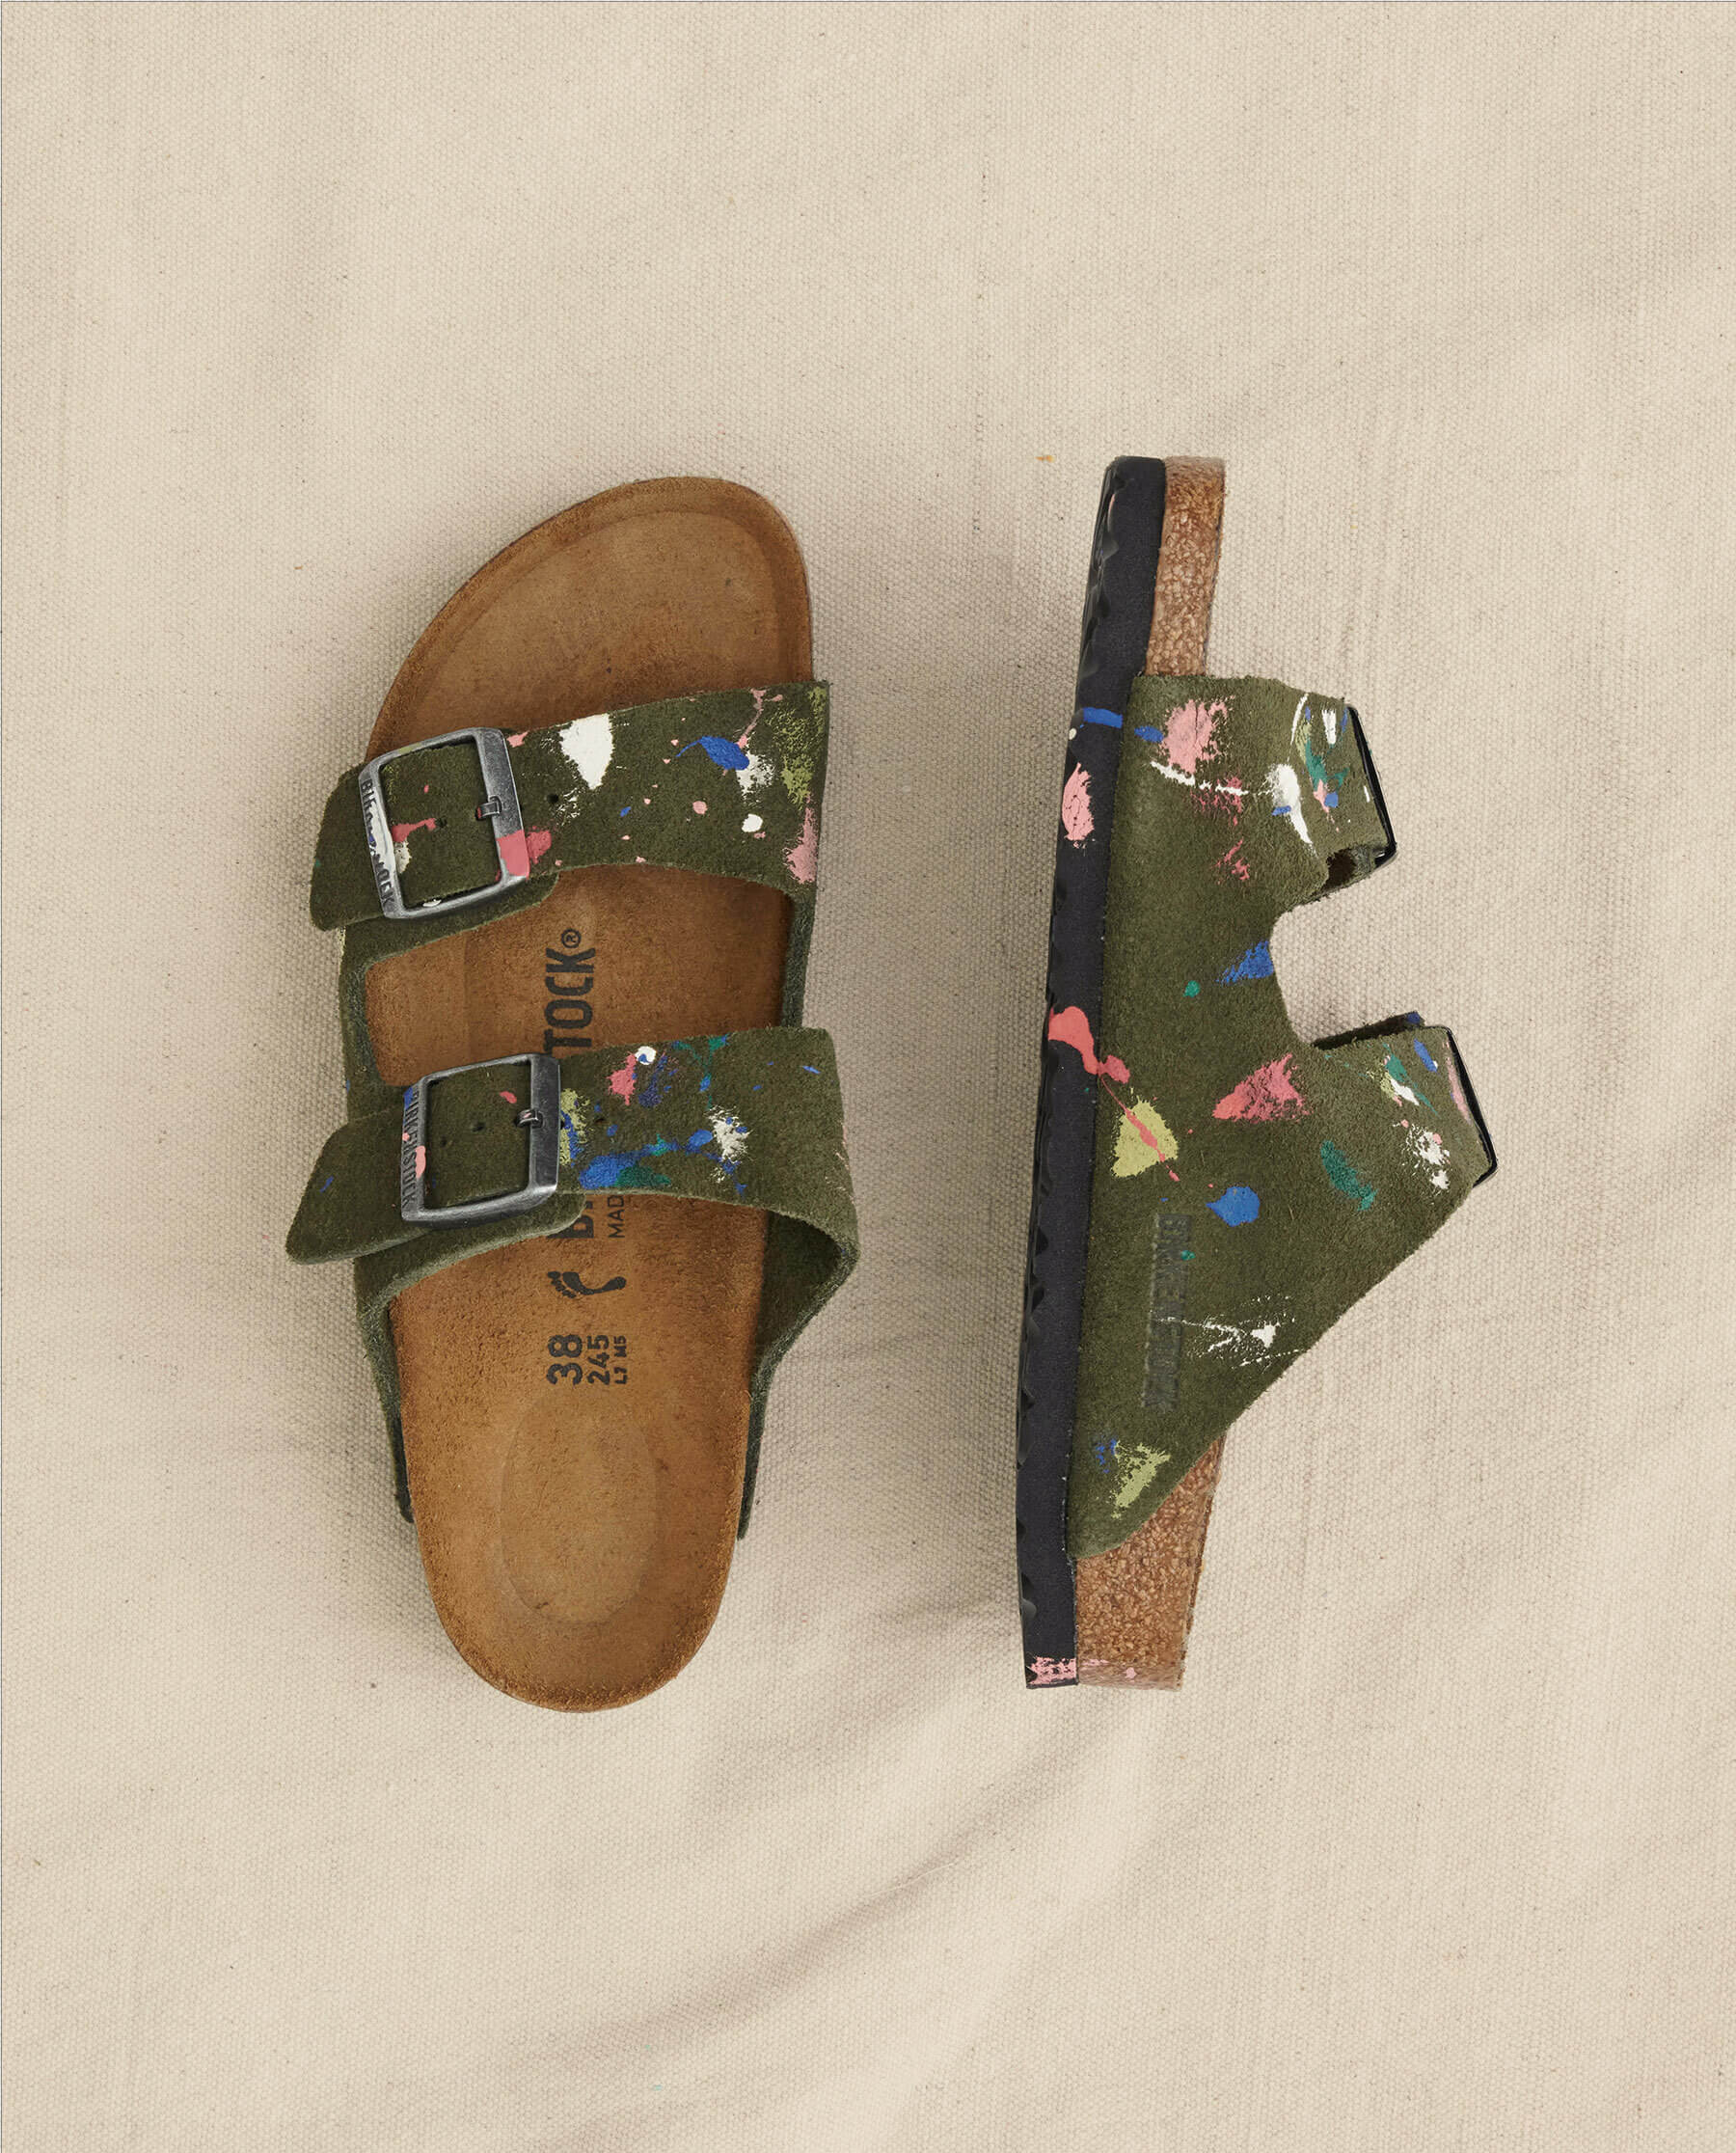 Arizona Thyme Birkenstock with Paint. -- Thyme with Bright Multi Paint SHOE THE GREAT. HOL 23 BIRKENSTOCK